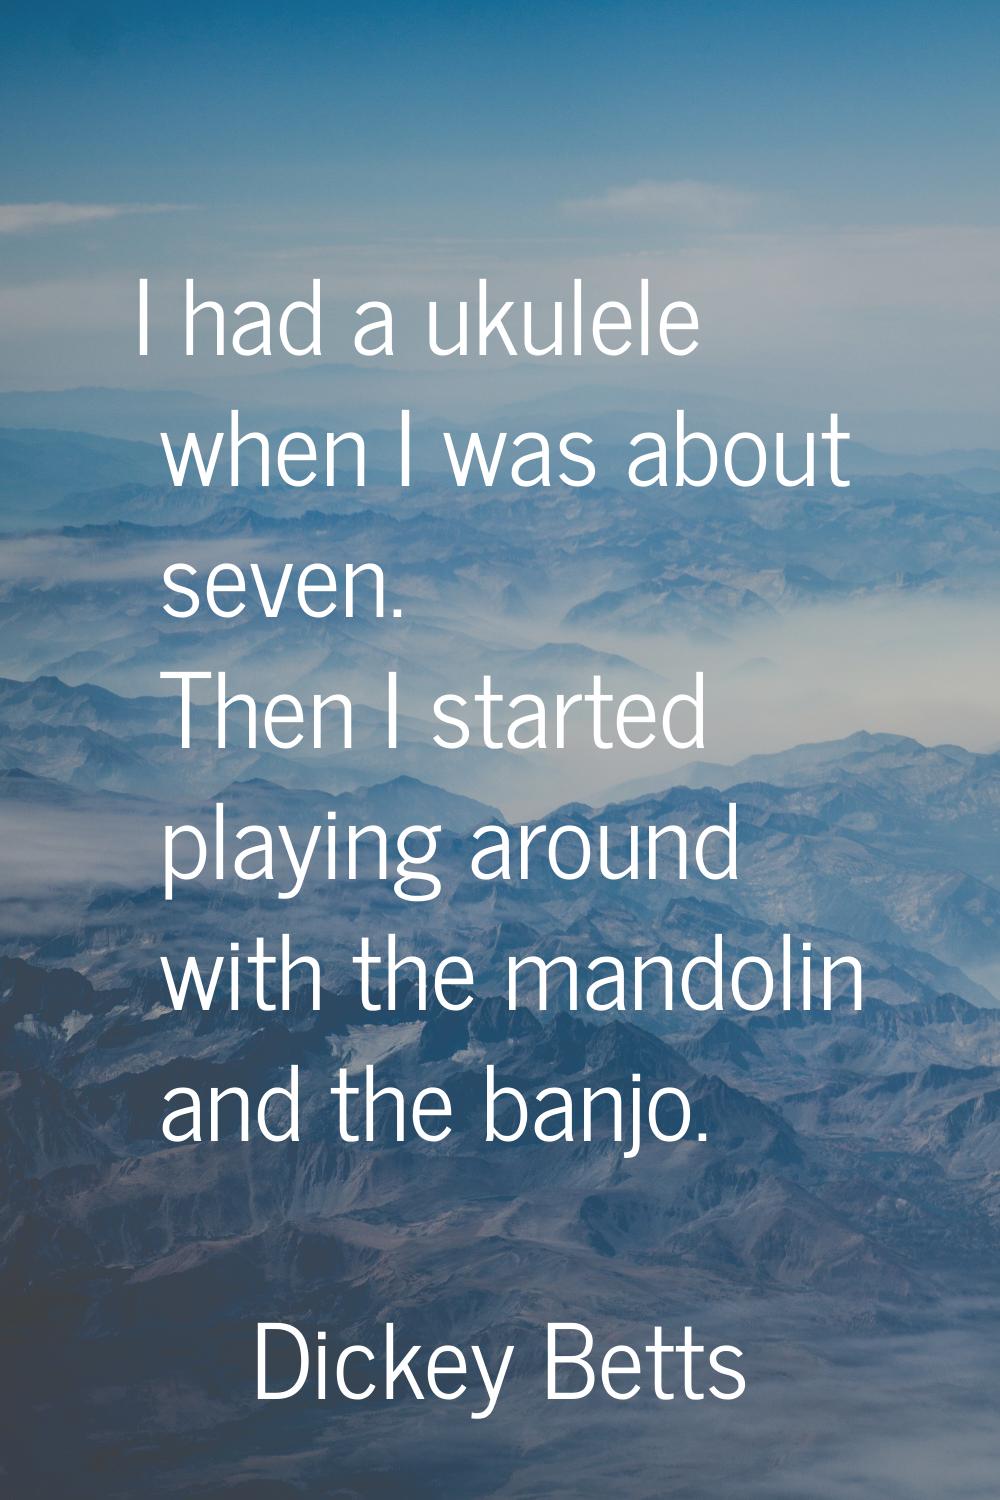 I had a ukulele when I was about seven. Then I started playing around with the mandolin and the ban